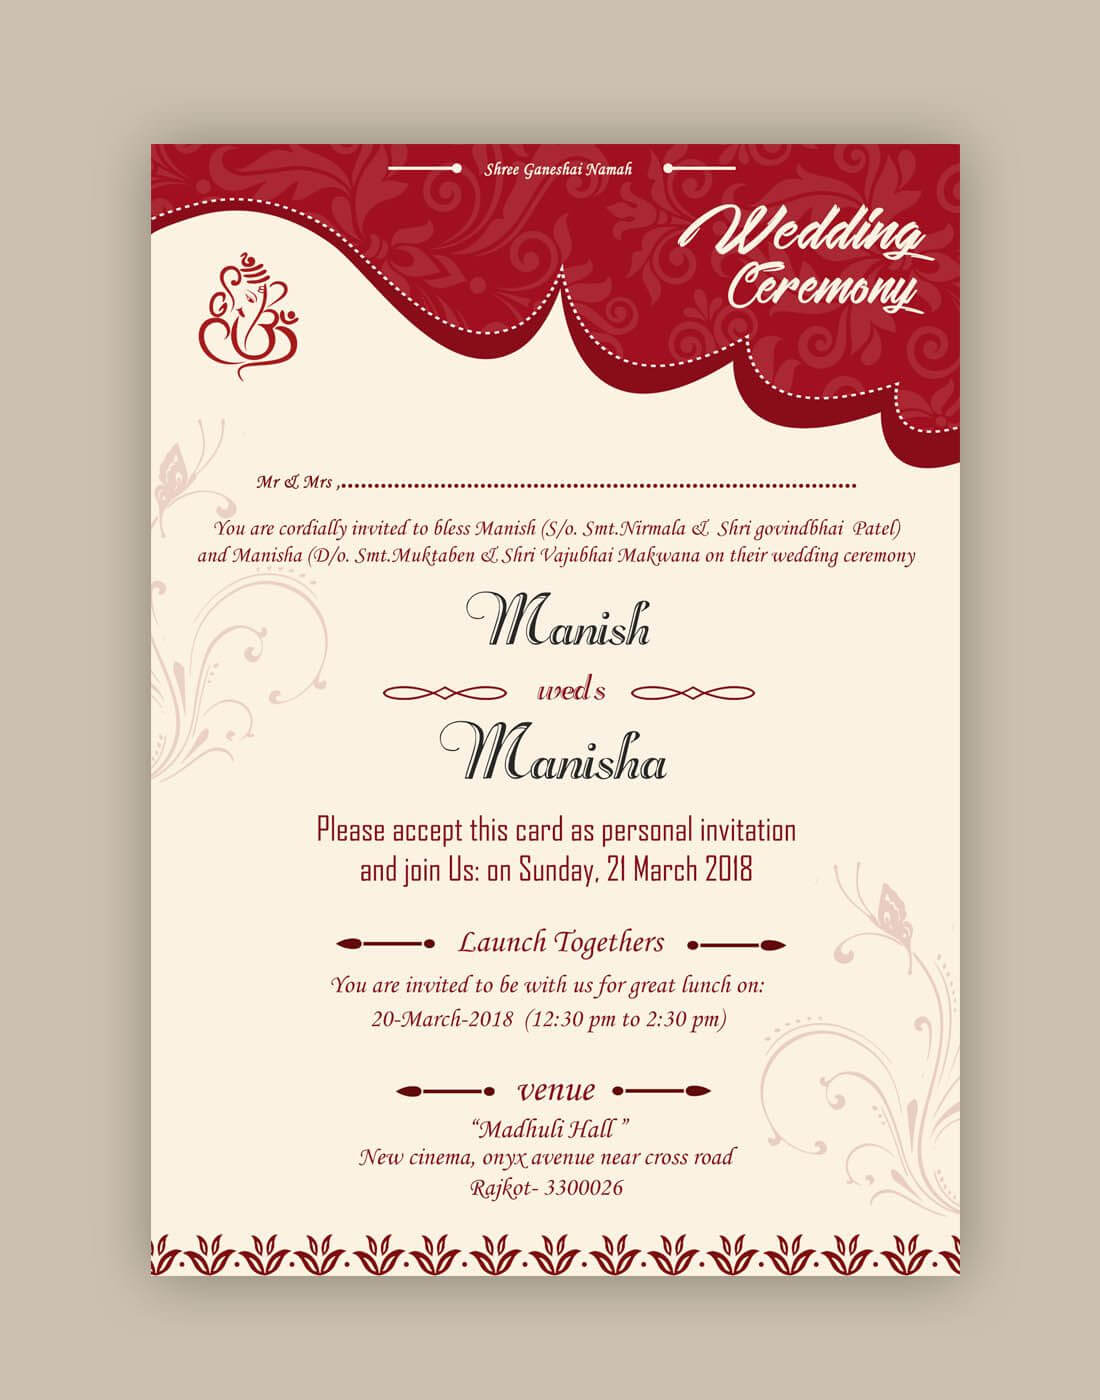 Free Wedding Card Psd Templates In 2019 | Free Wedding Cards Inside Free E Wedding Invitation Card Templates